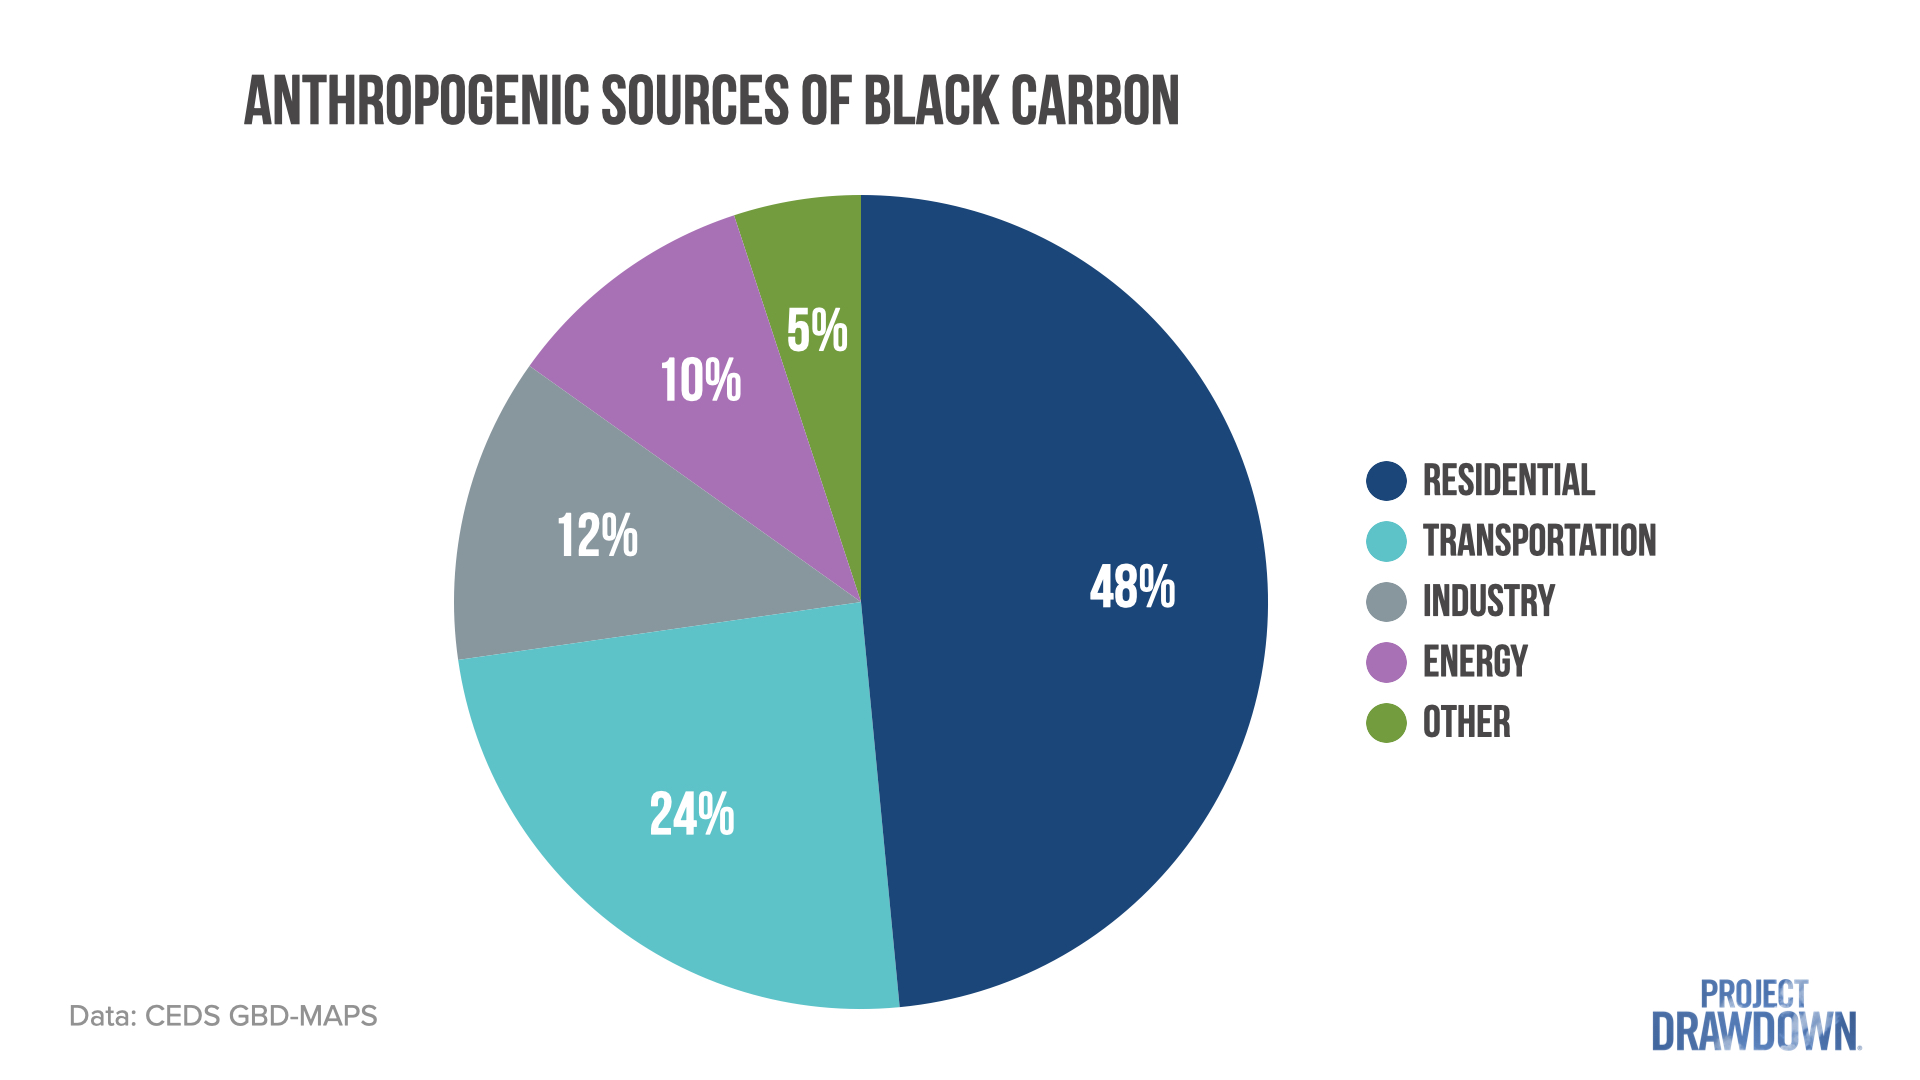 A pie chart showing anthropogenic sources of black carbon